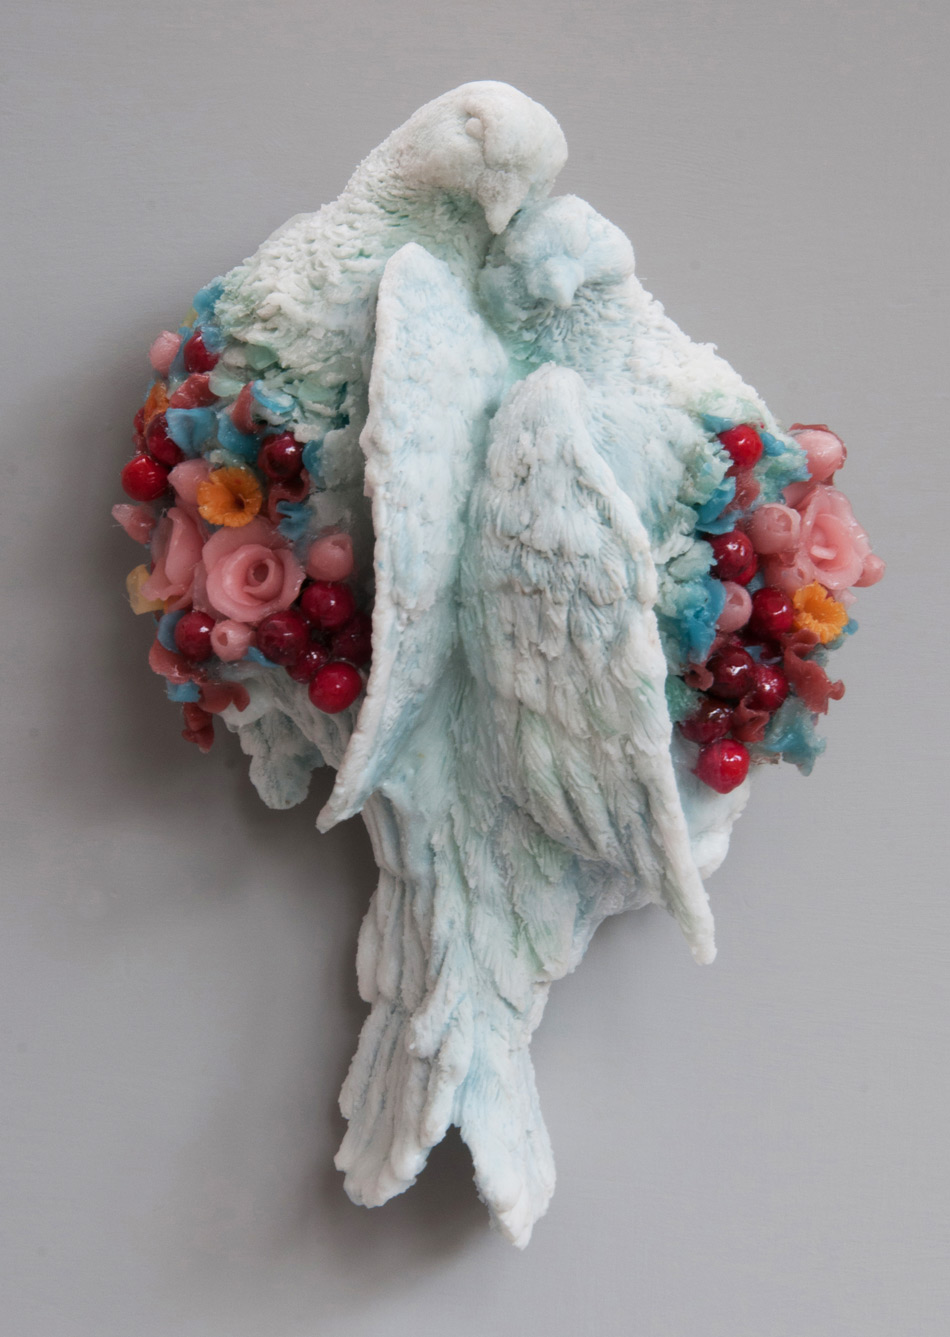 Beautifully Grotesque Disquieting Wax Sculptures Flower Decorated By Rebecca Stevenson 12